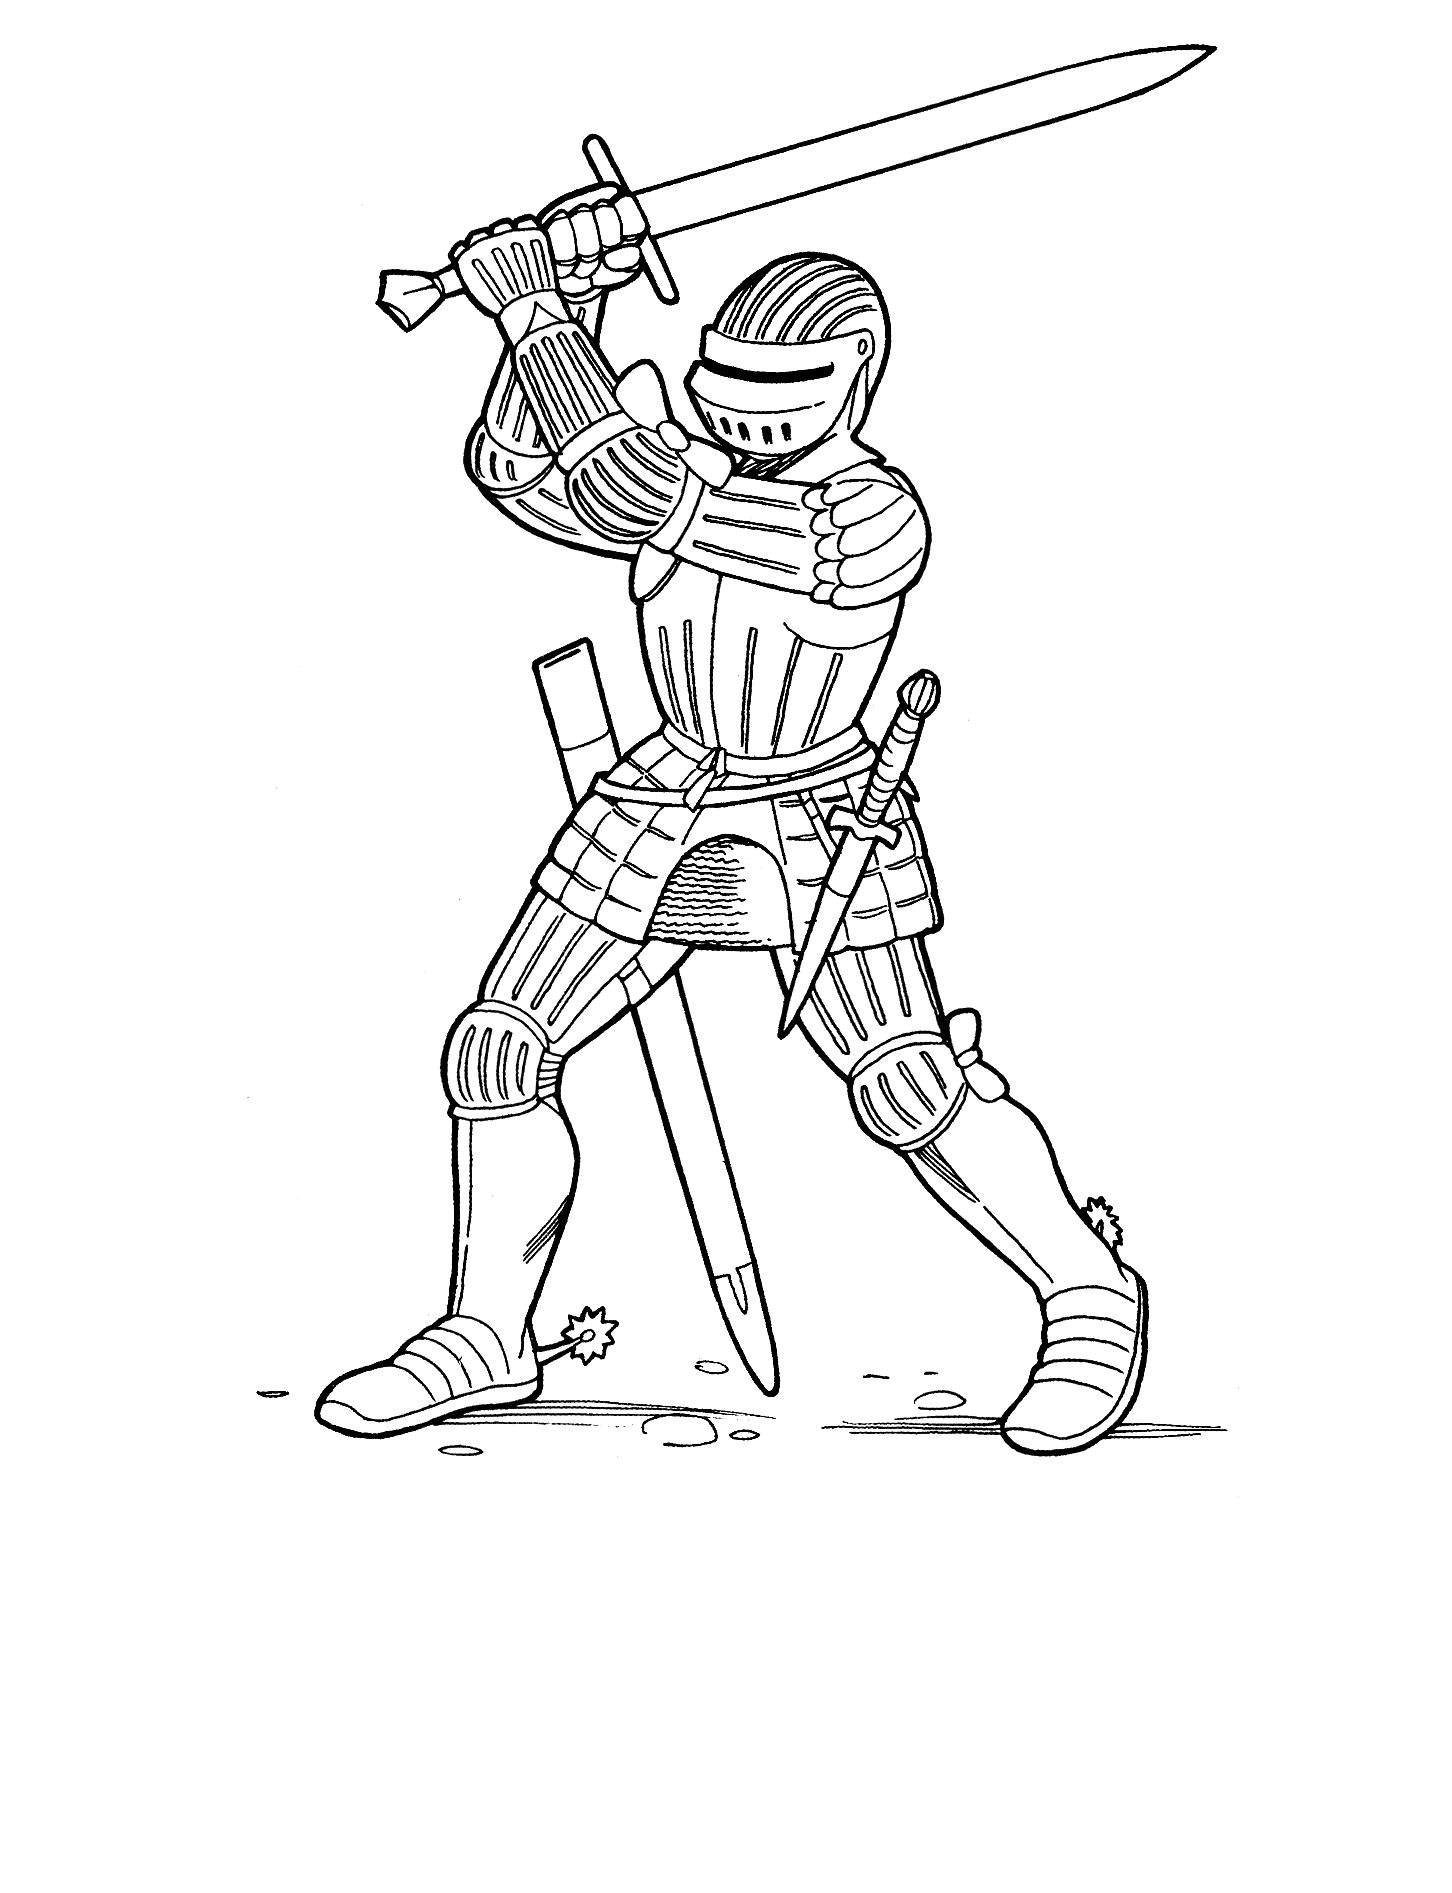 Coloring page - Knight with a two-handed sword